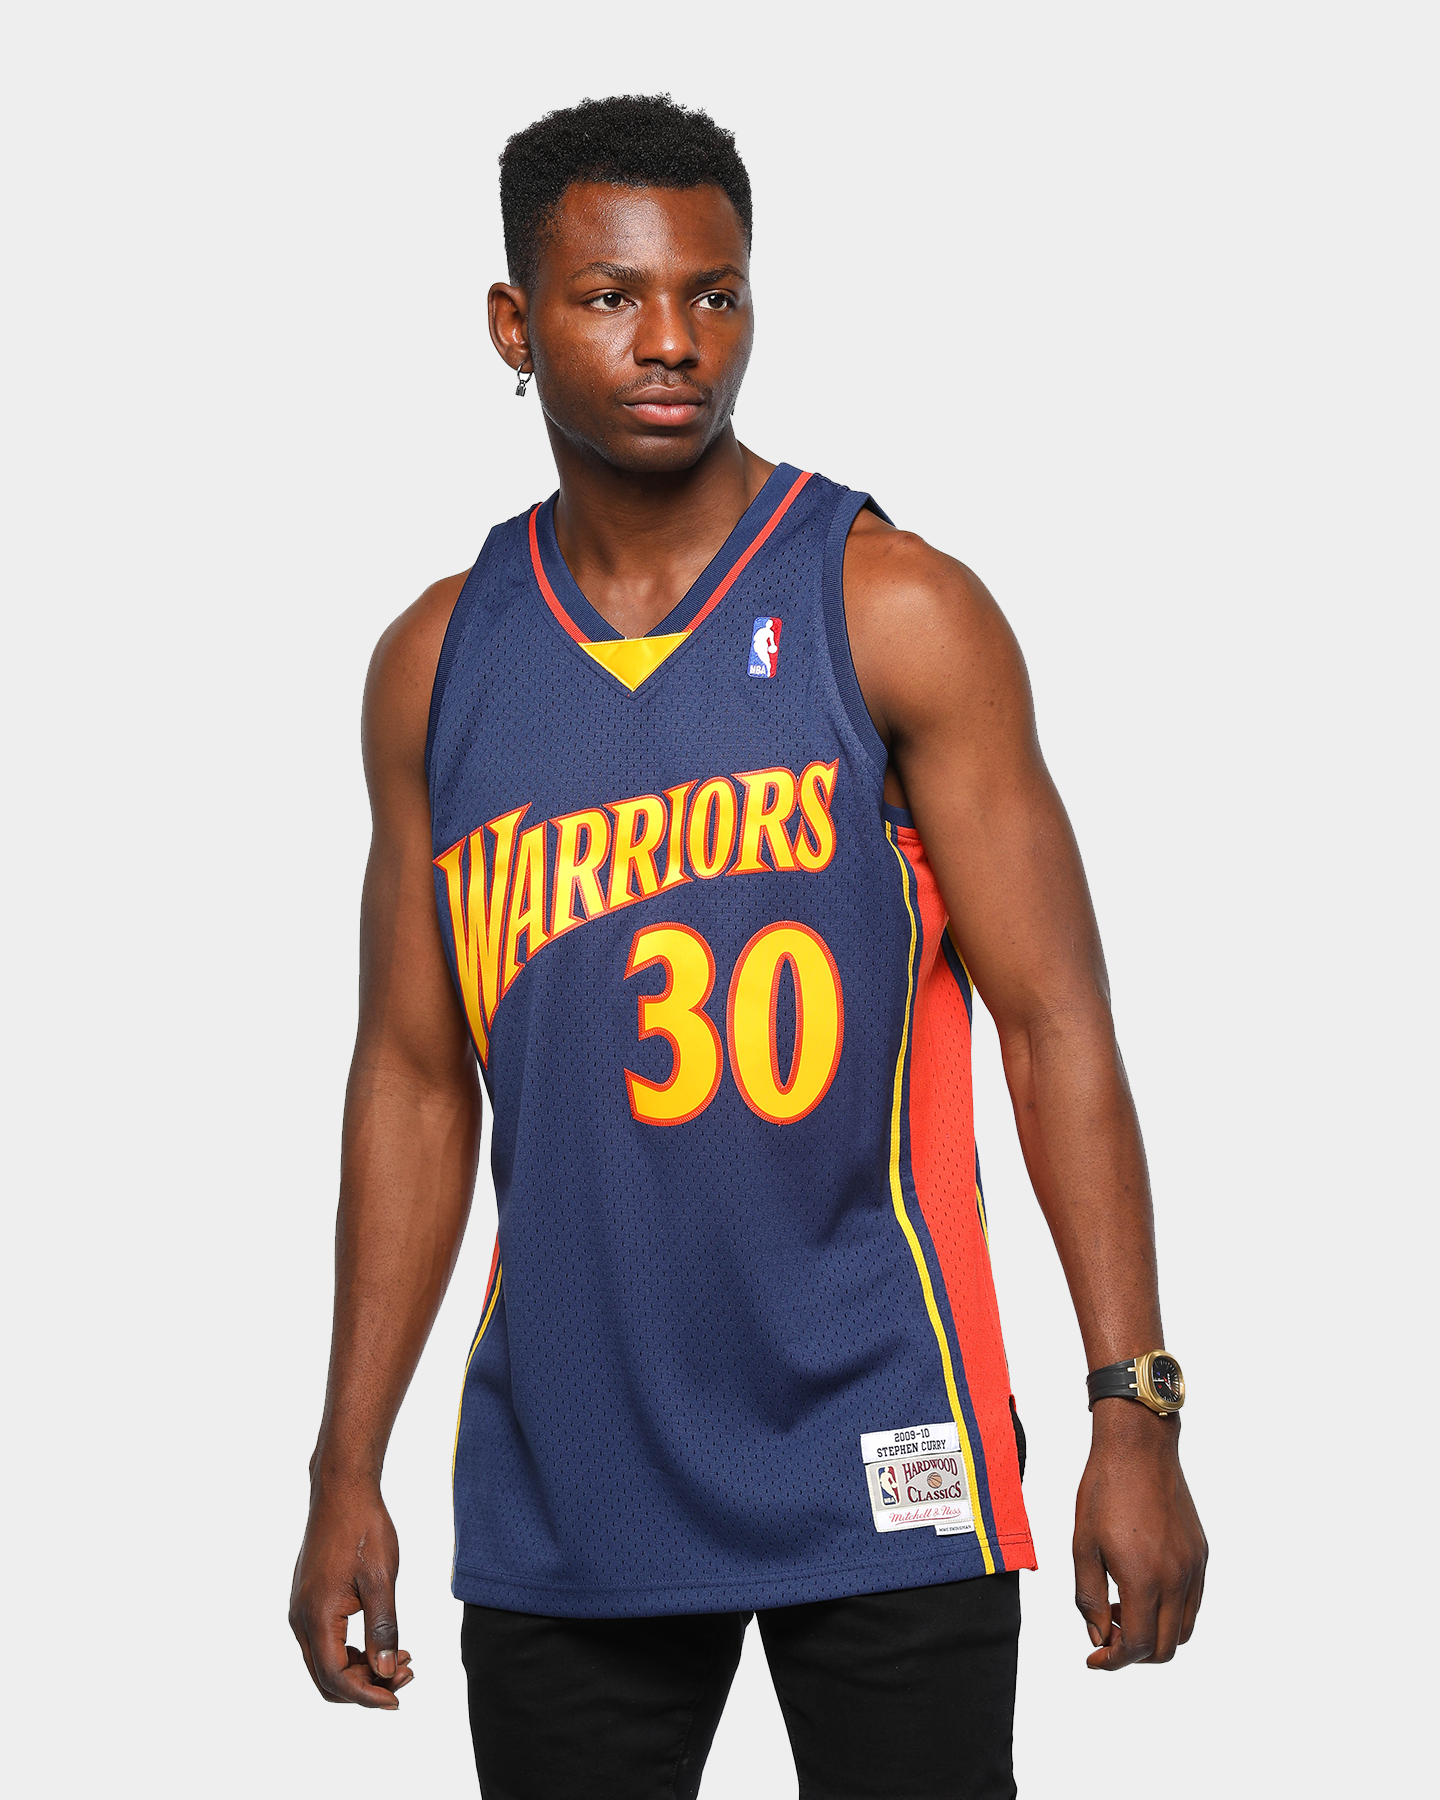 warriors red jersey